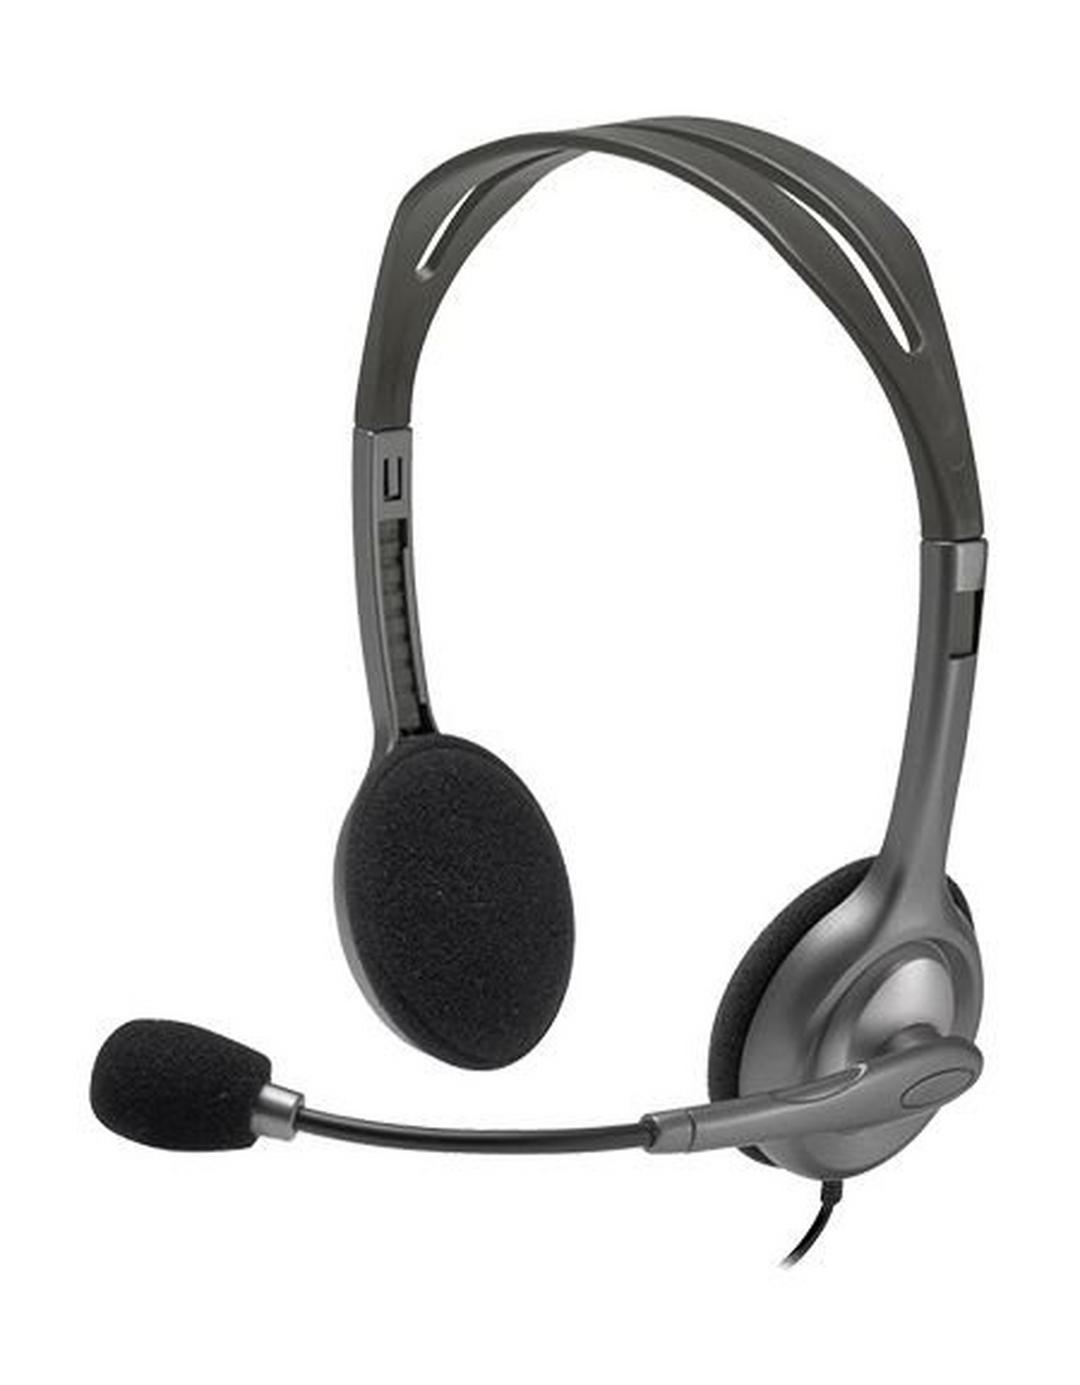 Logitech H111 Wired Over The Head Stereo Headset With Noise Canceling Mic (981-000593) – Grey / Black